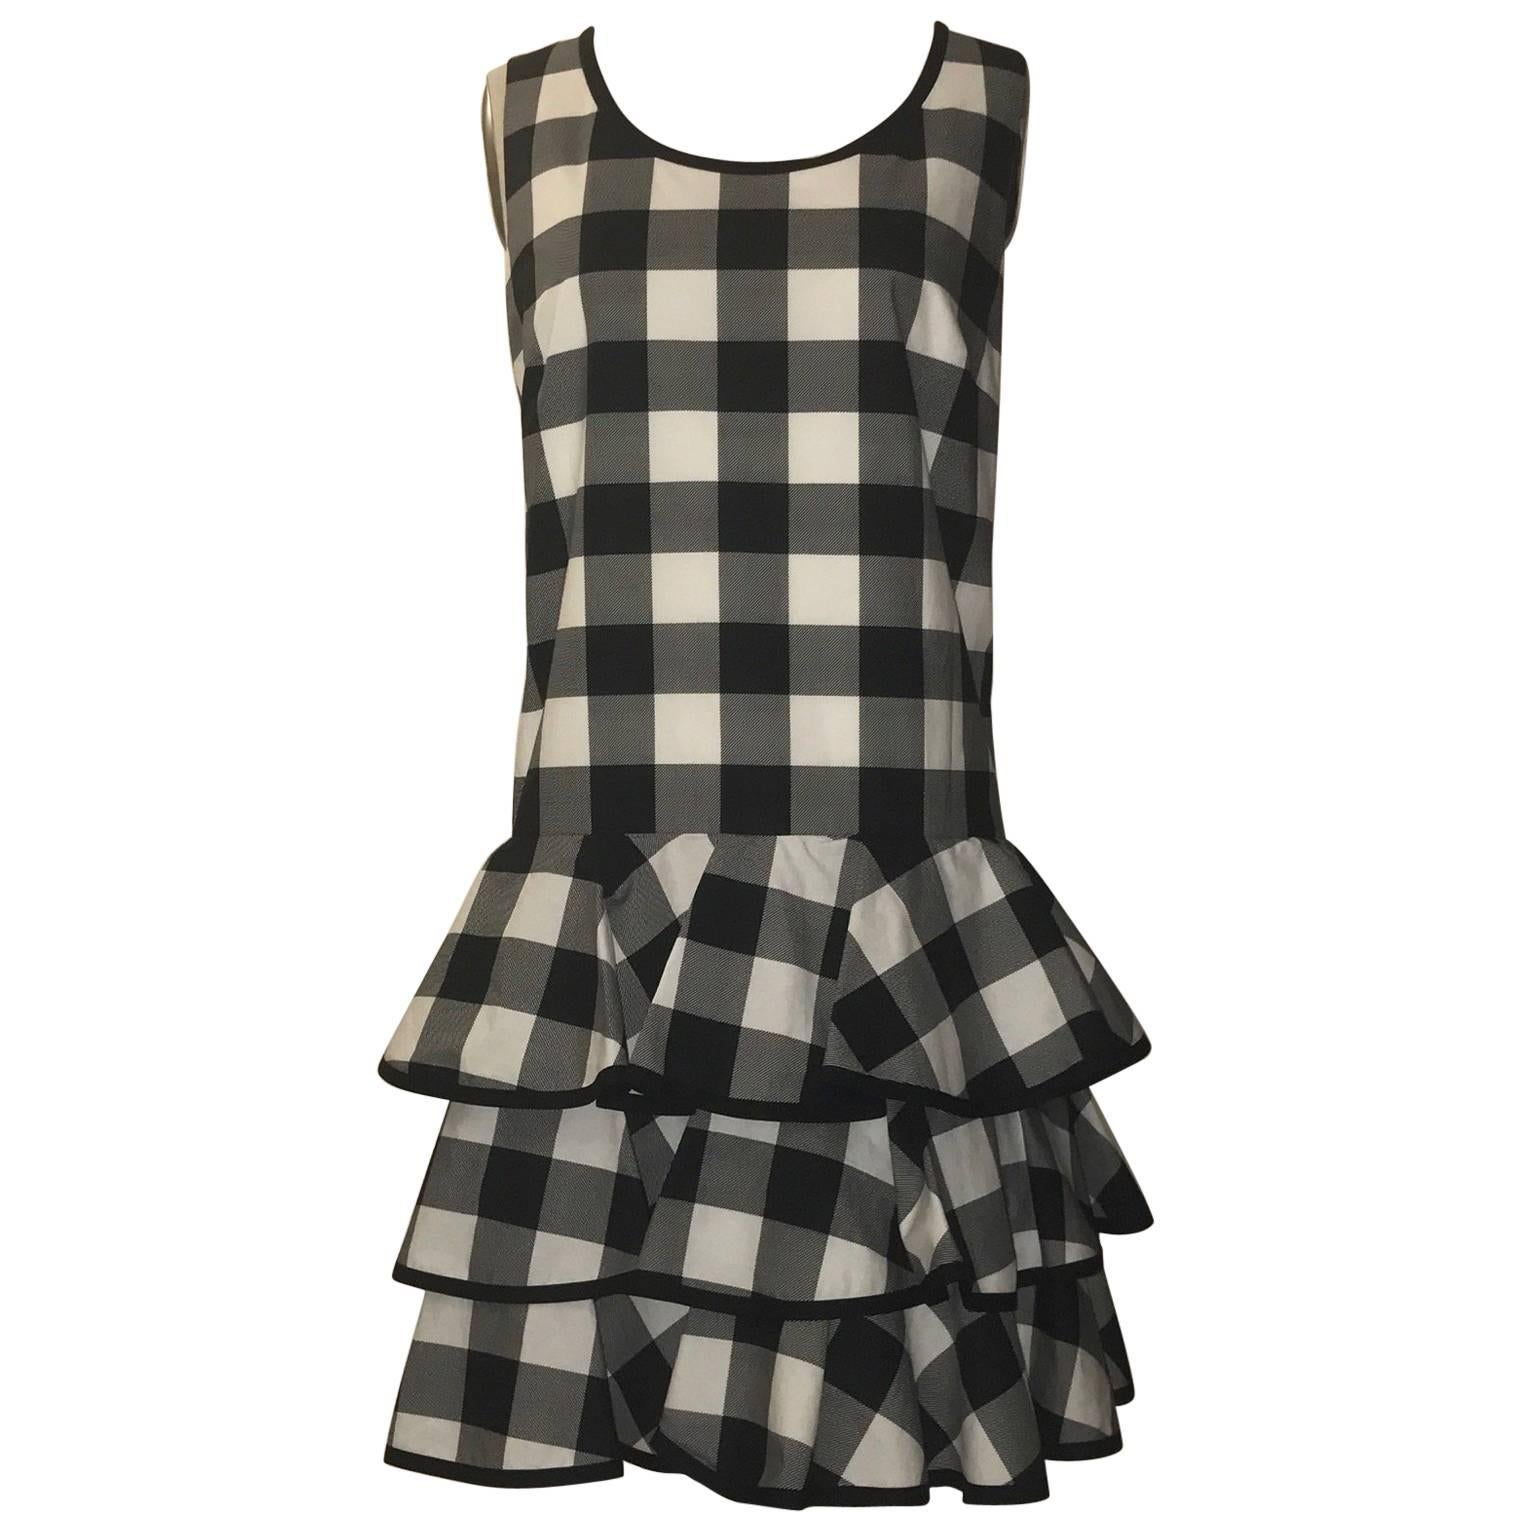 Dolce & Gabbana New With Tags Black White Check Ruffle Tiered Skirt Sun Dress